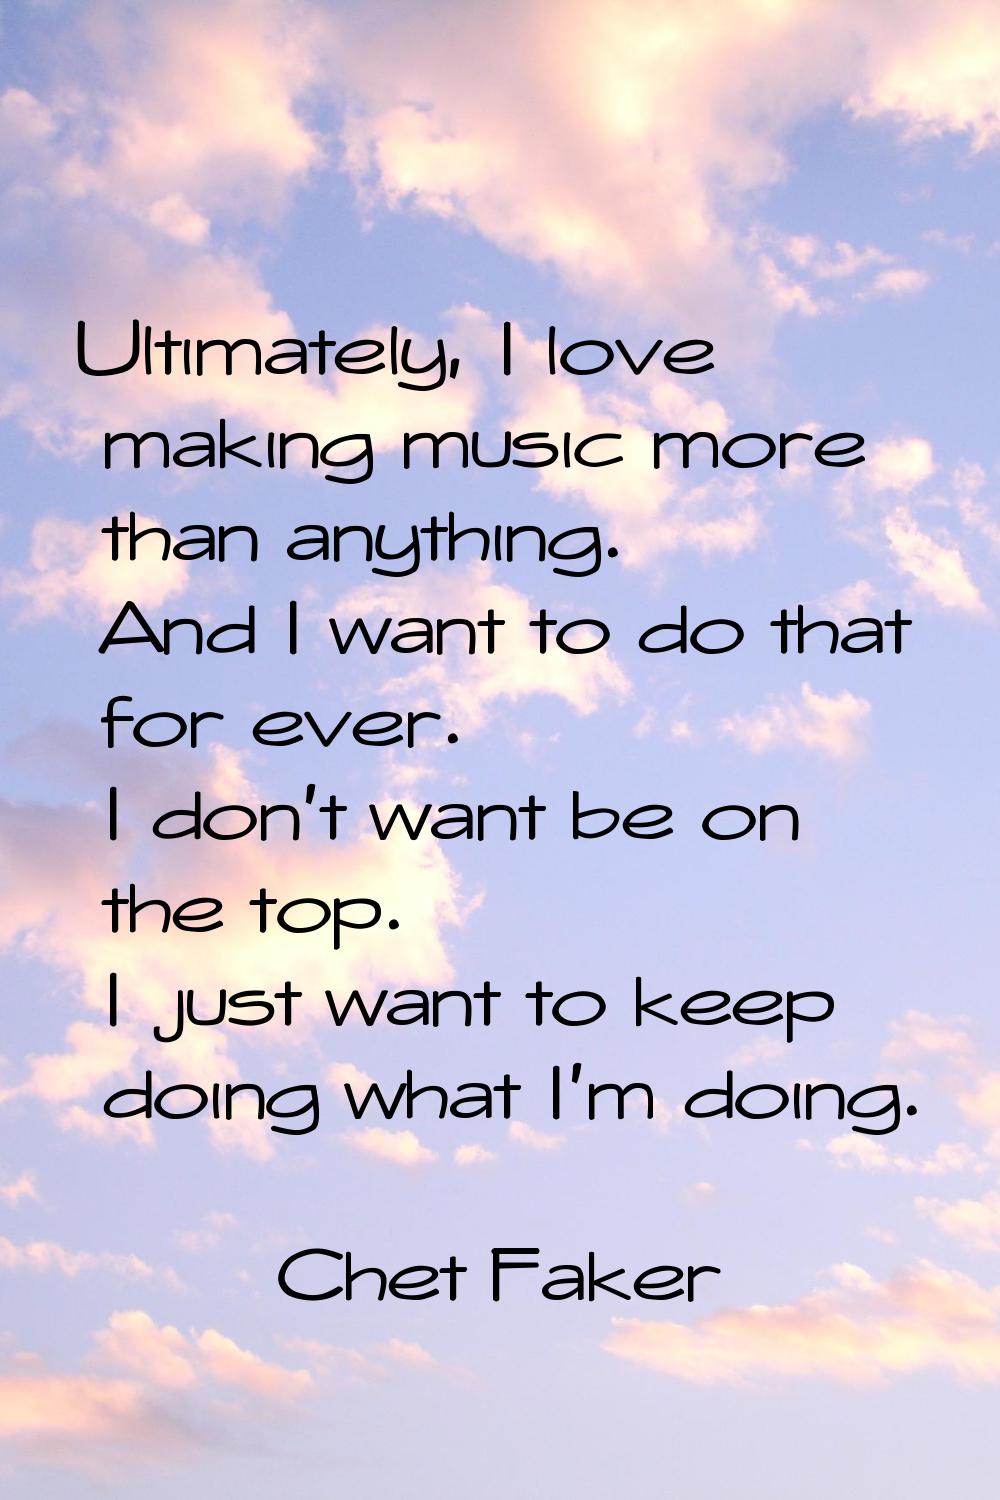 Ultimately, I love making music more than anything. And I want to do that for ever. I don't want be